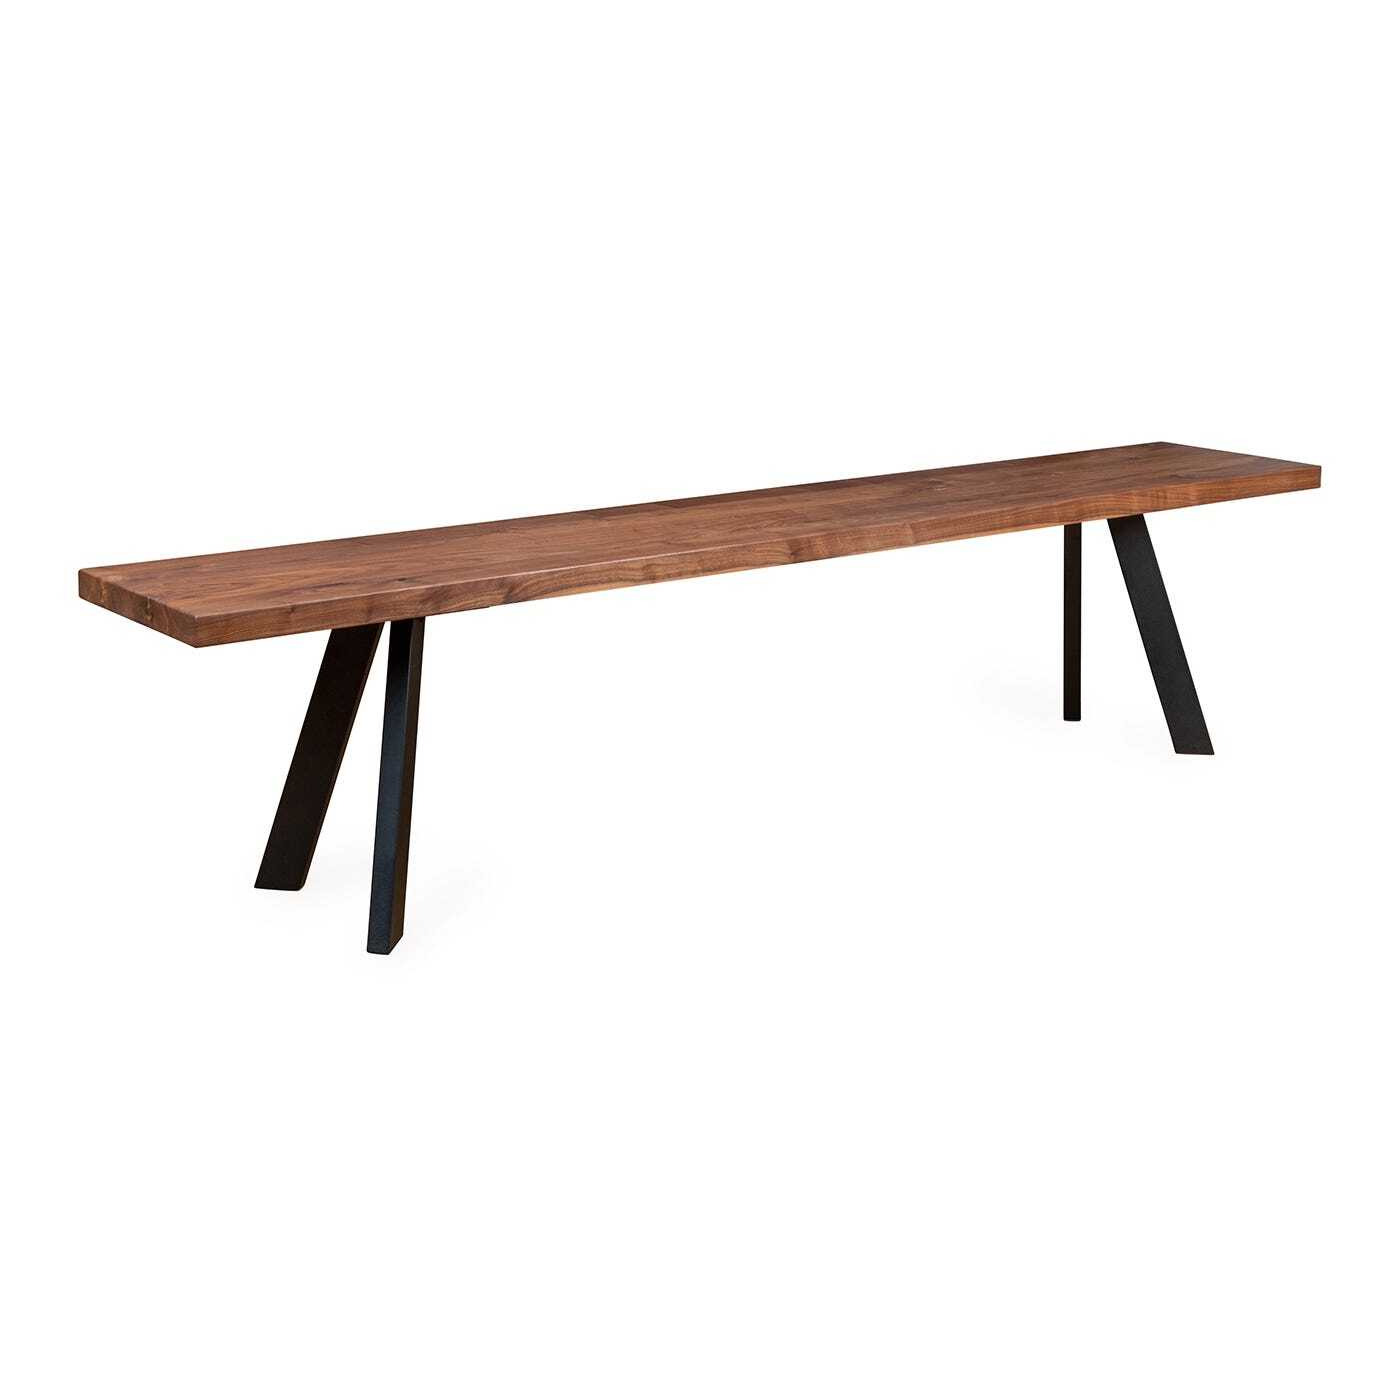 Heal's Madrid Bench 200x35cm Oiled Walnut Straight Edge Not Filled - image 1